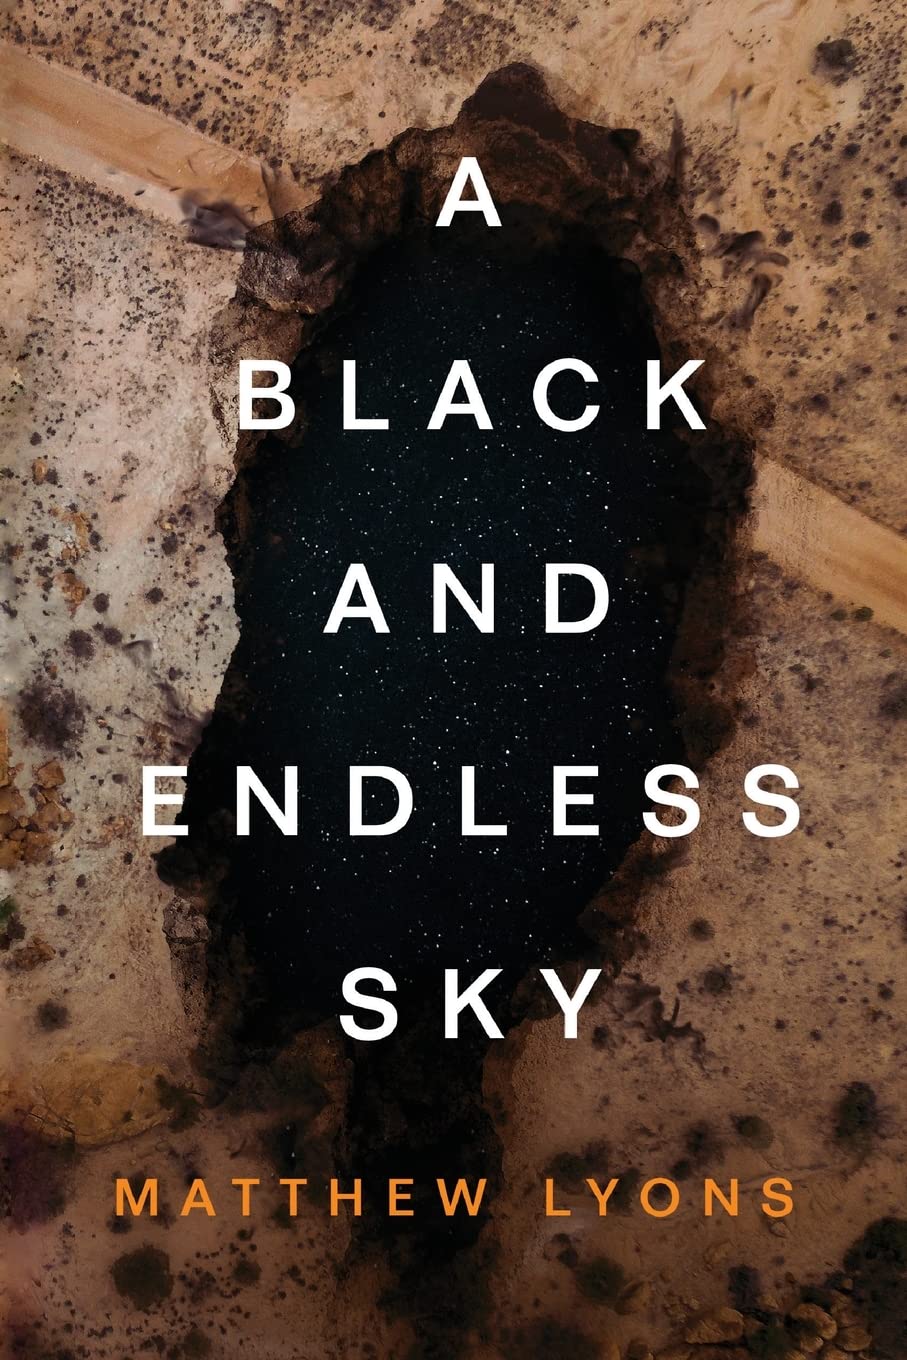 Image for "A Black and Endless Sky"